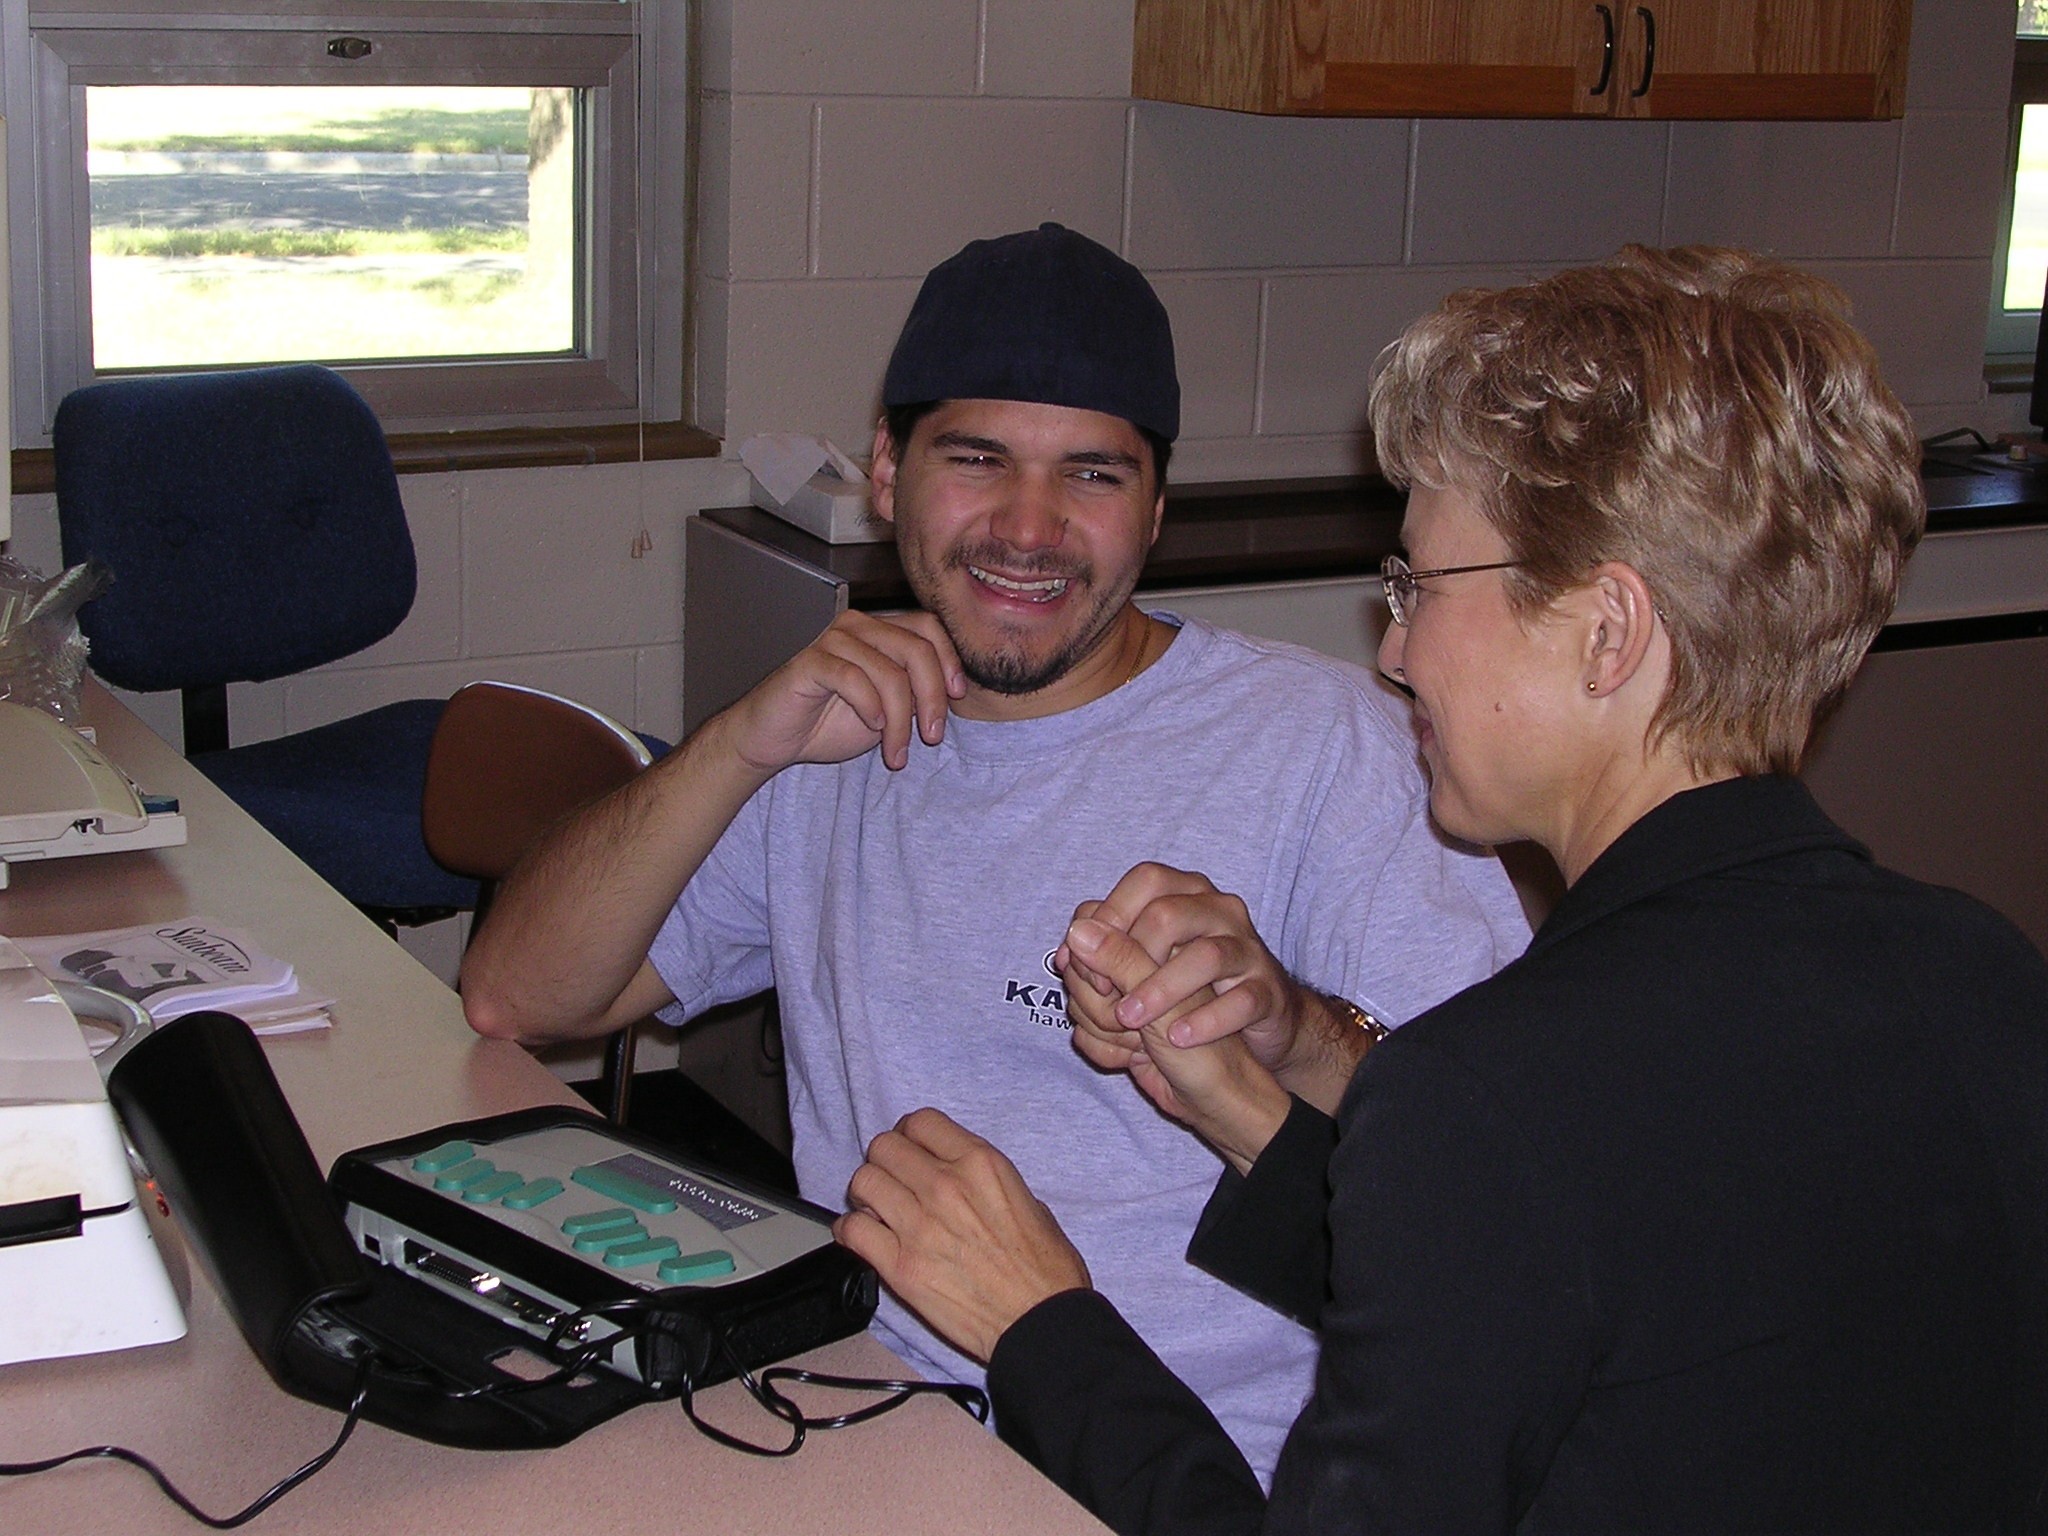 DeafBlind student learning BrailleNote machine communicates with MCB Training Center instructor via tactile sign language